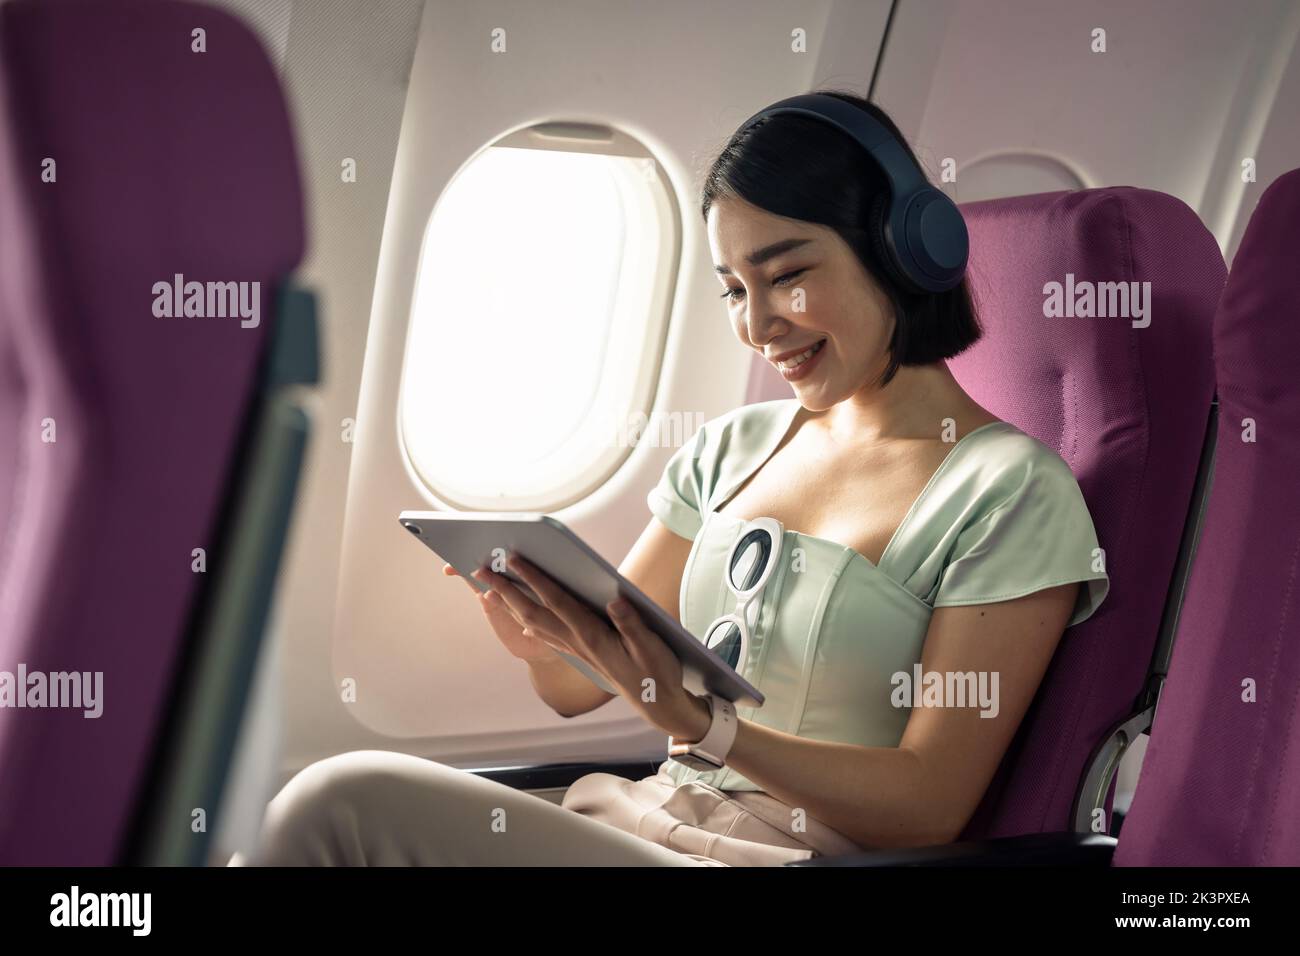 Passenger using tablet computer in airplane cabin during flight. watching series. Stock Photo